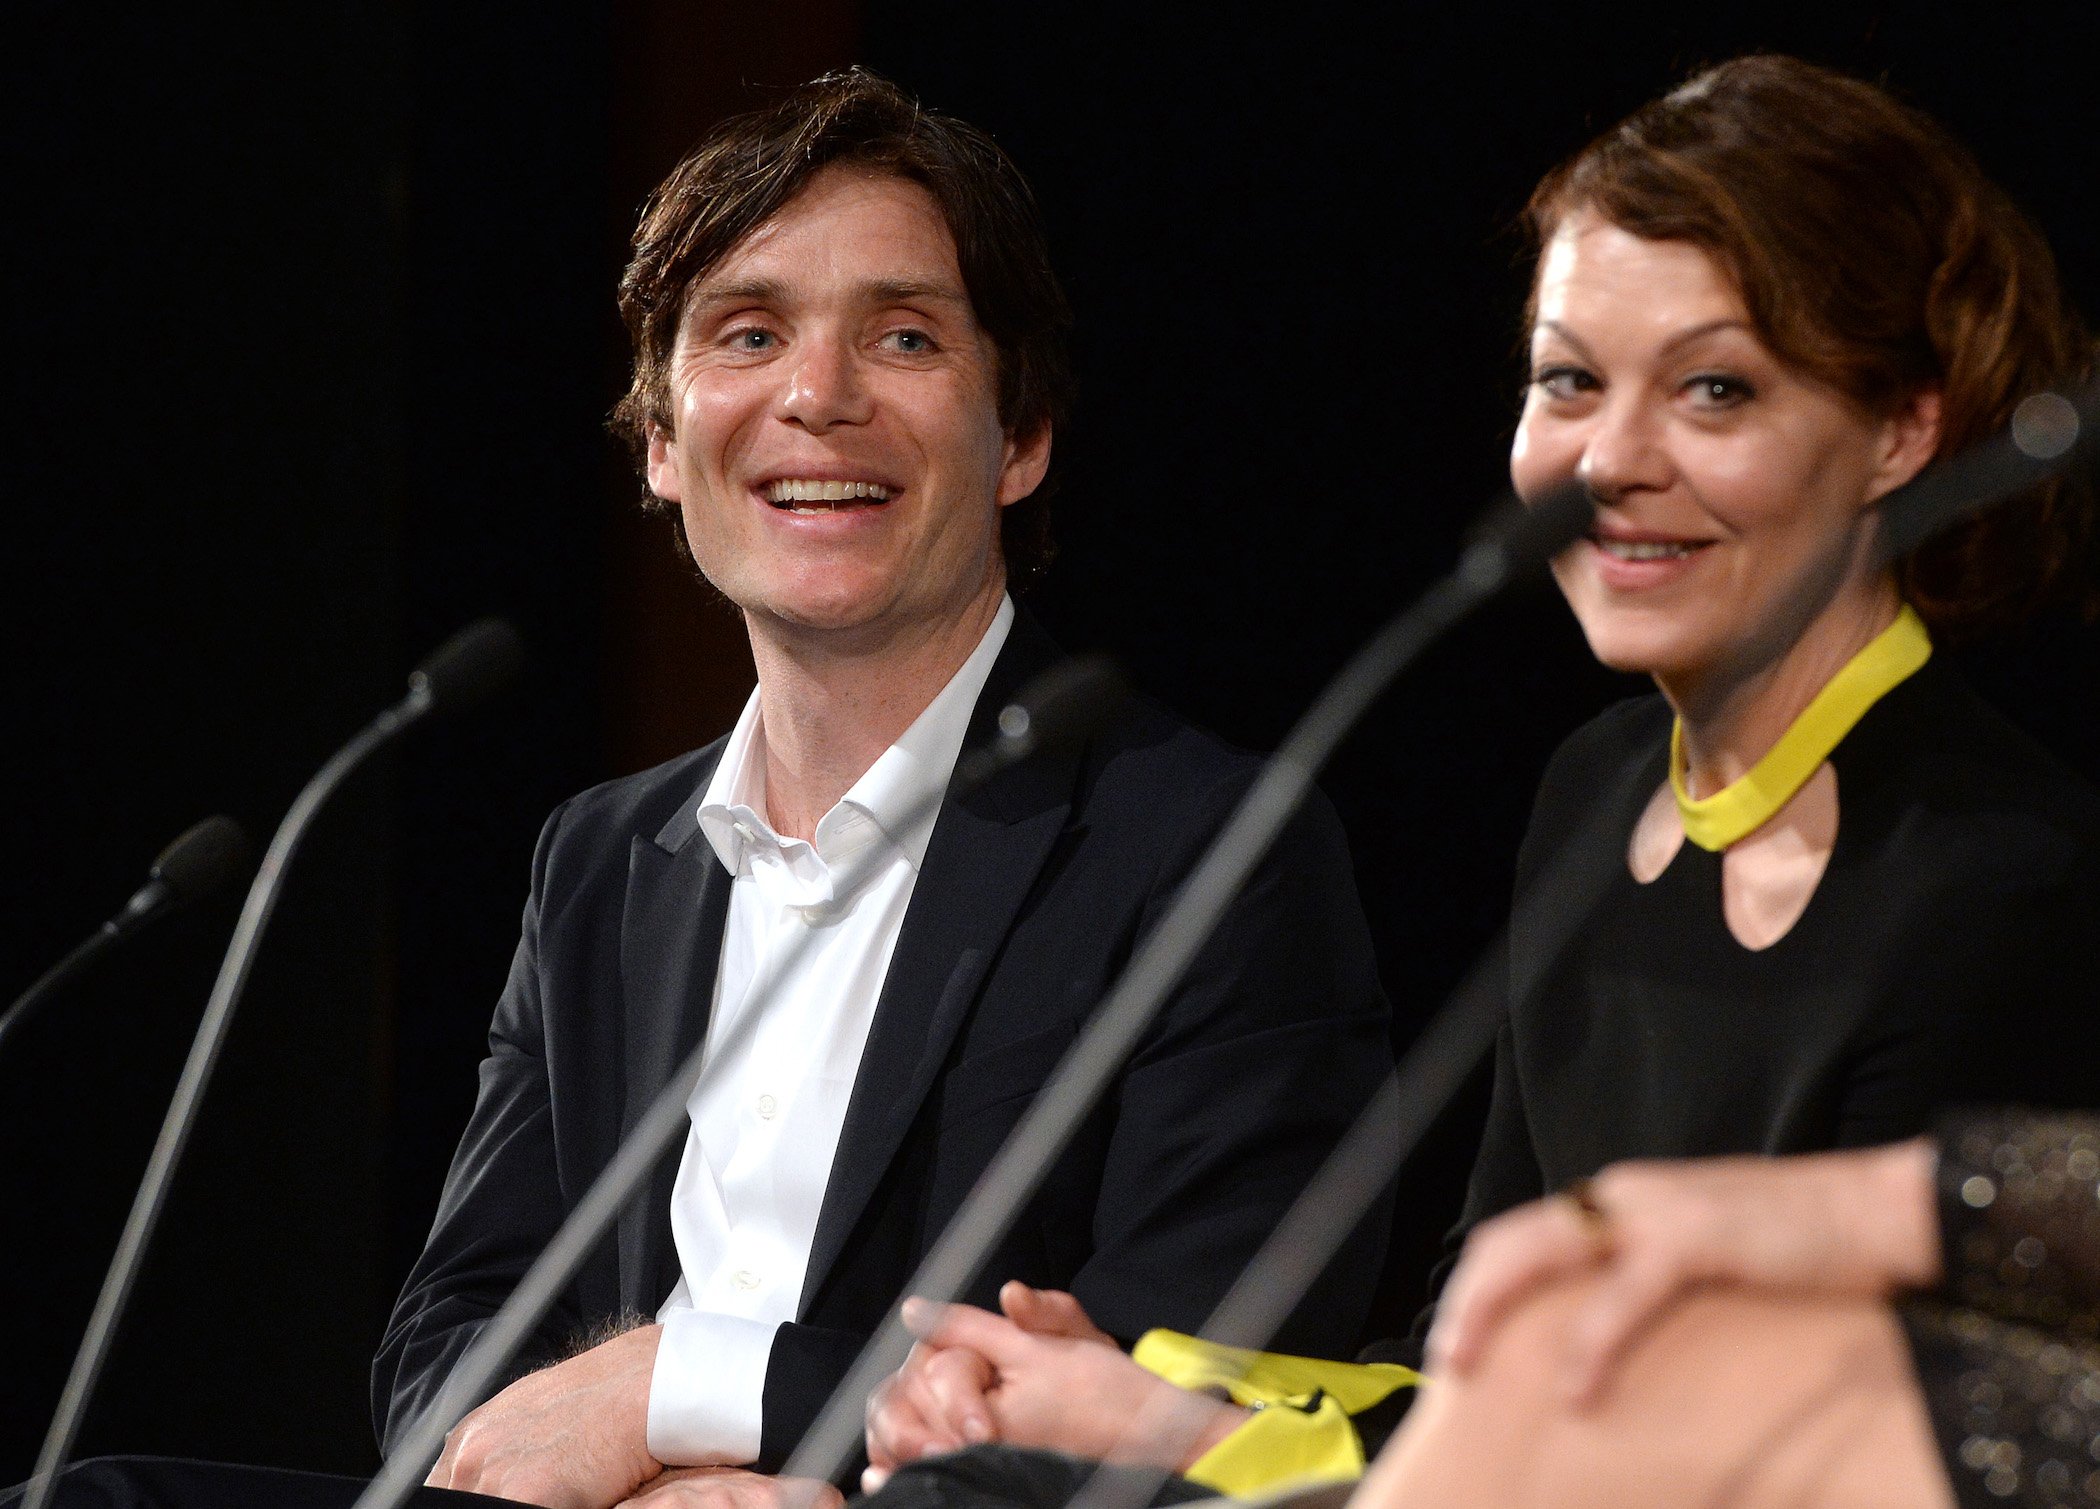 Cillian Murphy and Helen McCrory laughing at a 'Peaky Blinders' Q&A